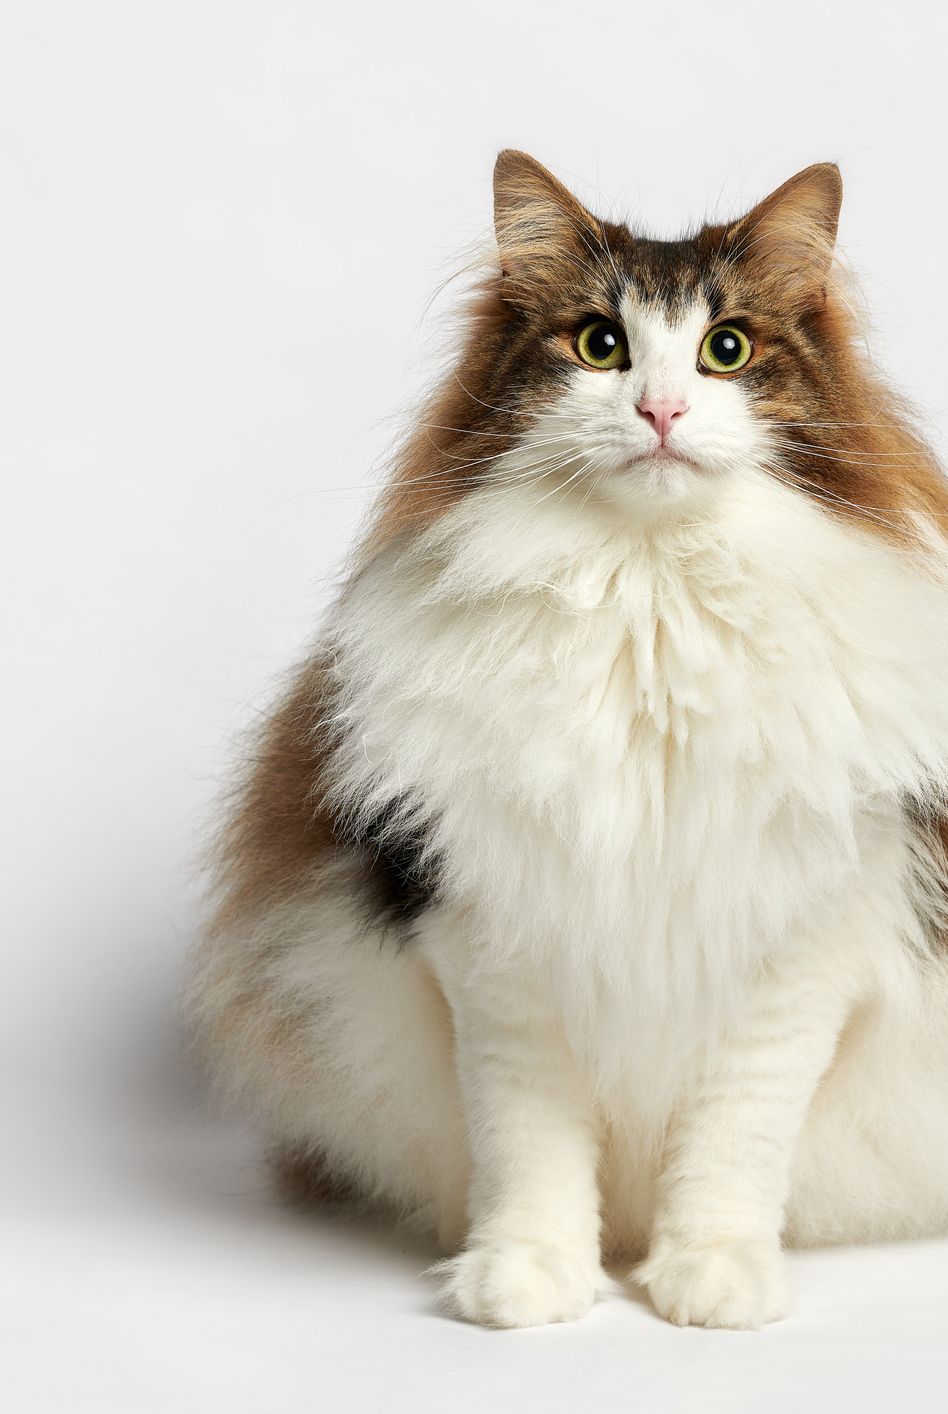 10 Best Large Cat Breeds - Top Big Cat List and Pictures